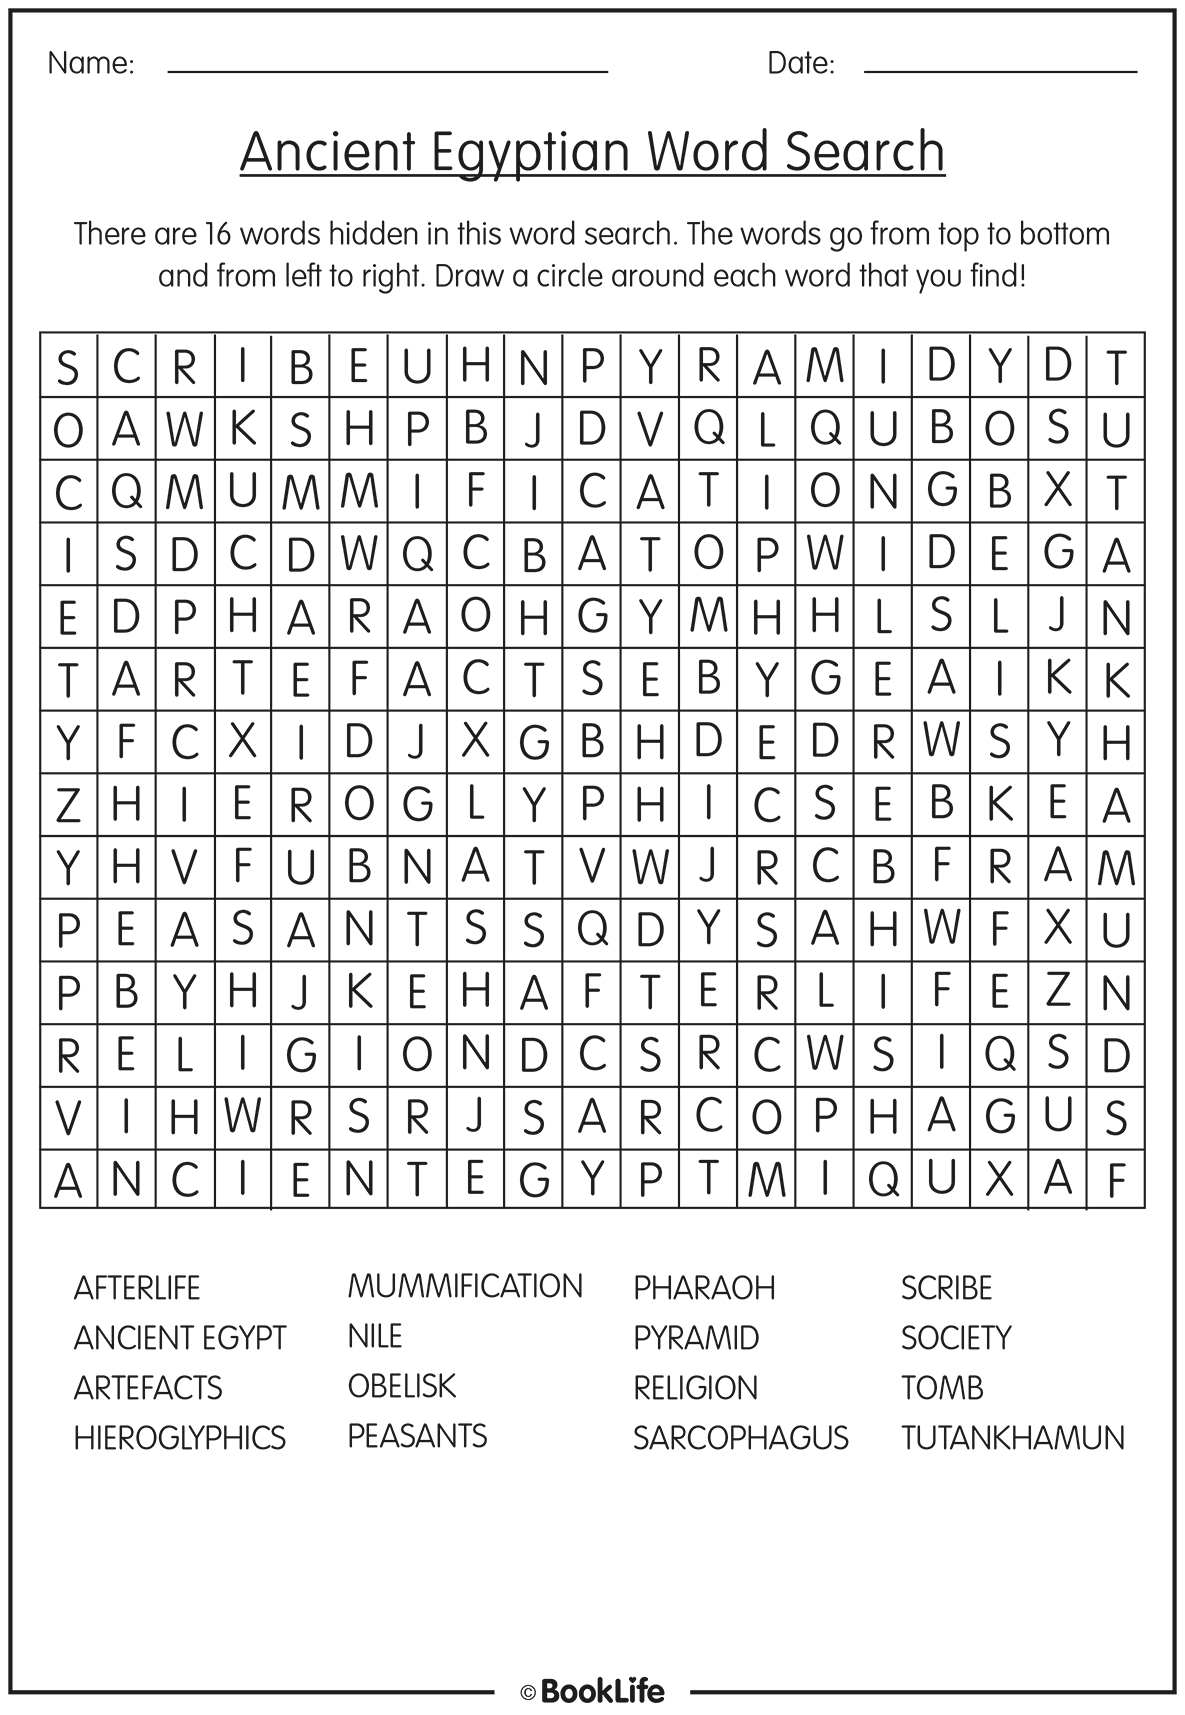 Ancient Egyptian Word Search by BookLife